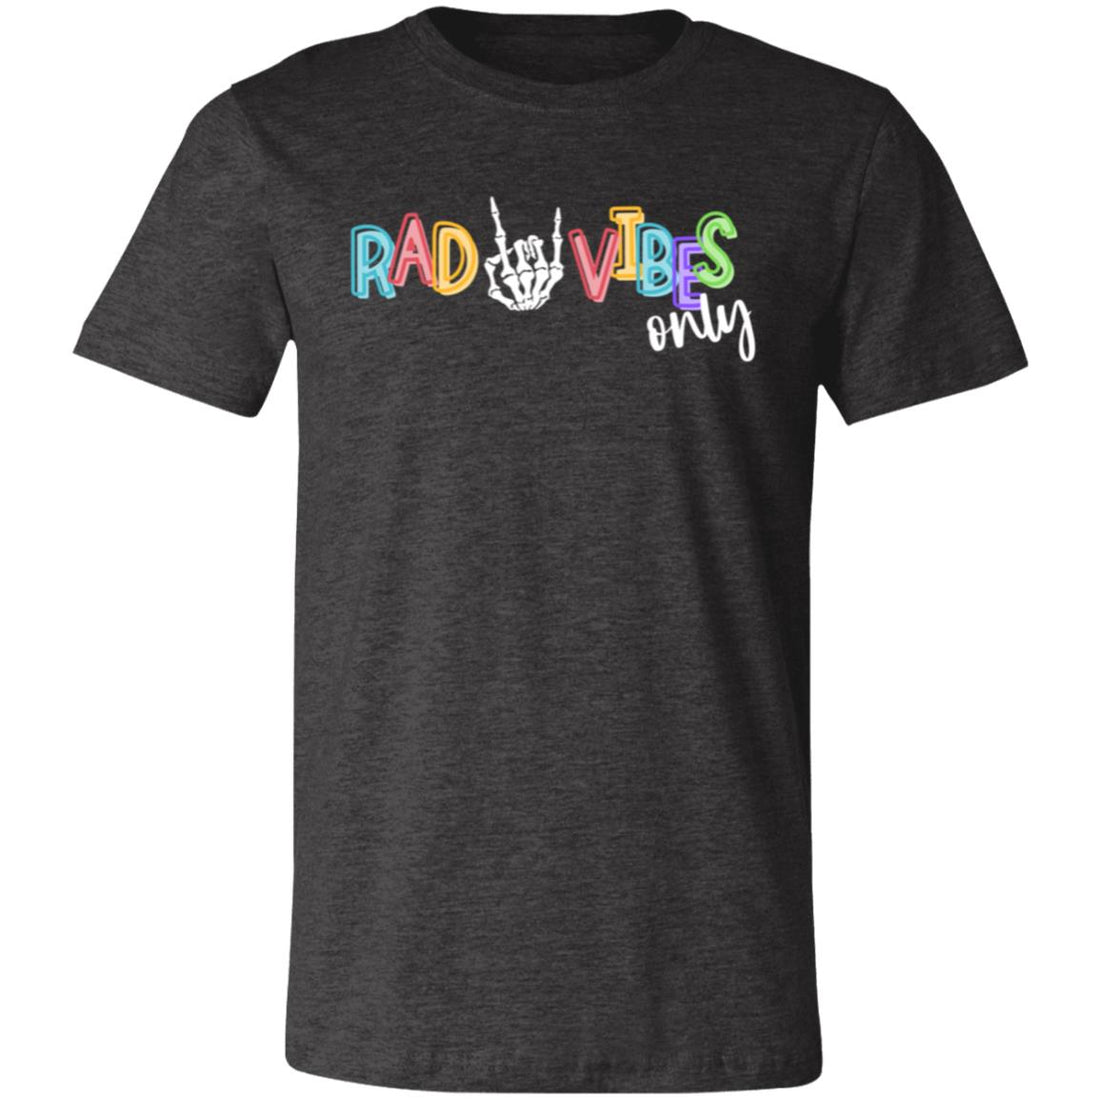 Rad Vibes Only Unisex Jersey Short-Sleeve T-Shirt - T-Shirts - Positively Sassy - Rad Vibes Only Unisex Jersey Short-Sleeve T-Shirt